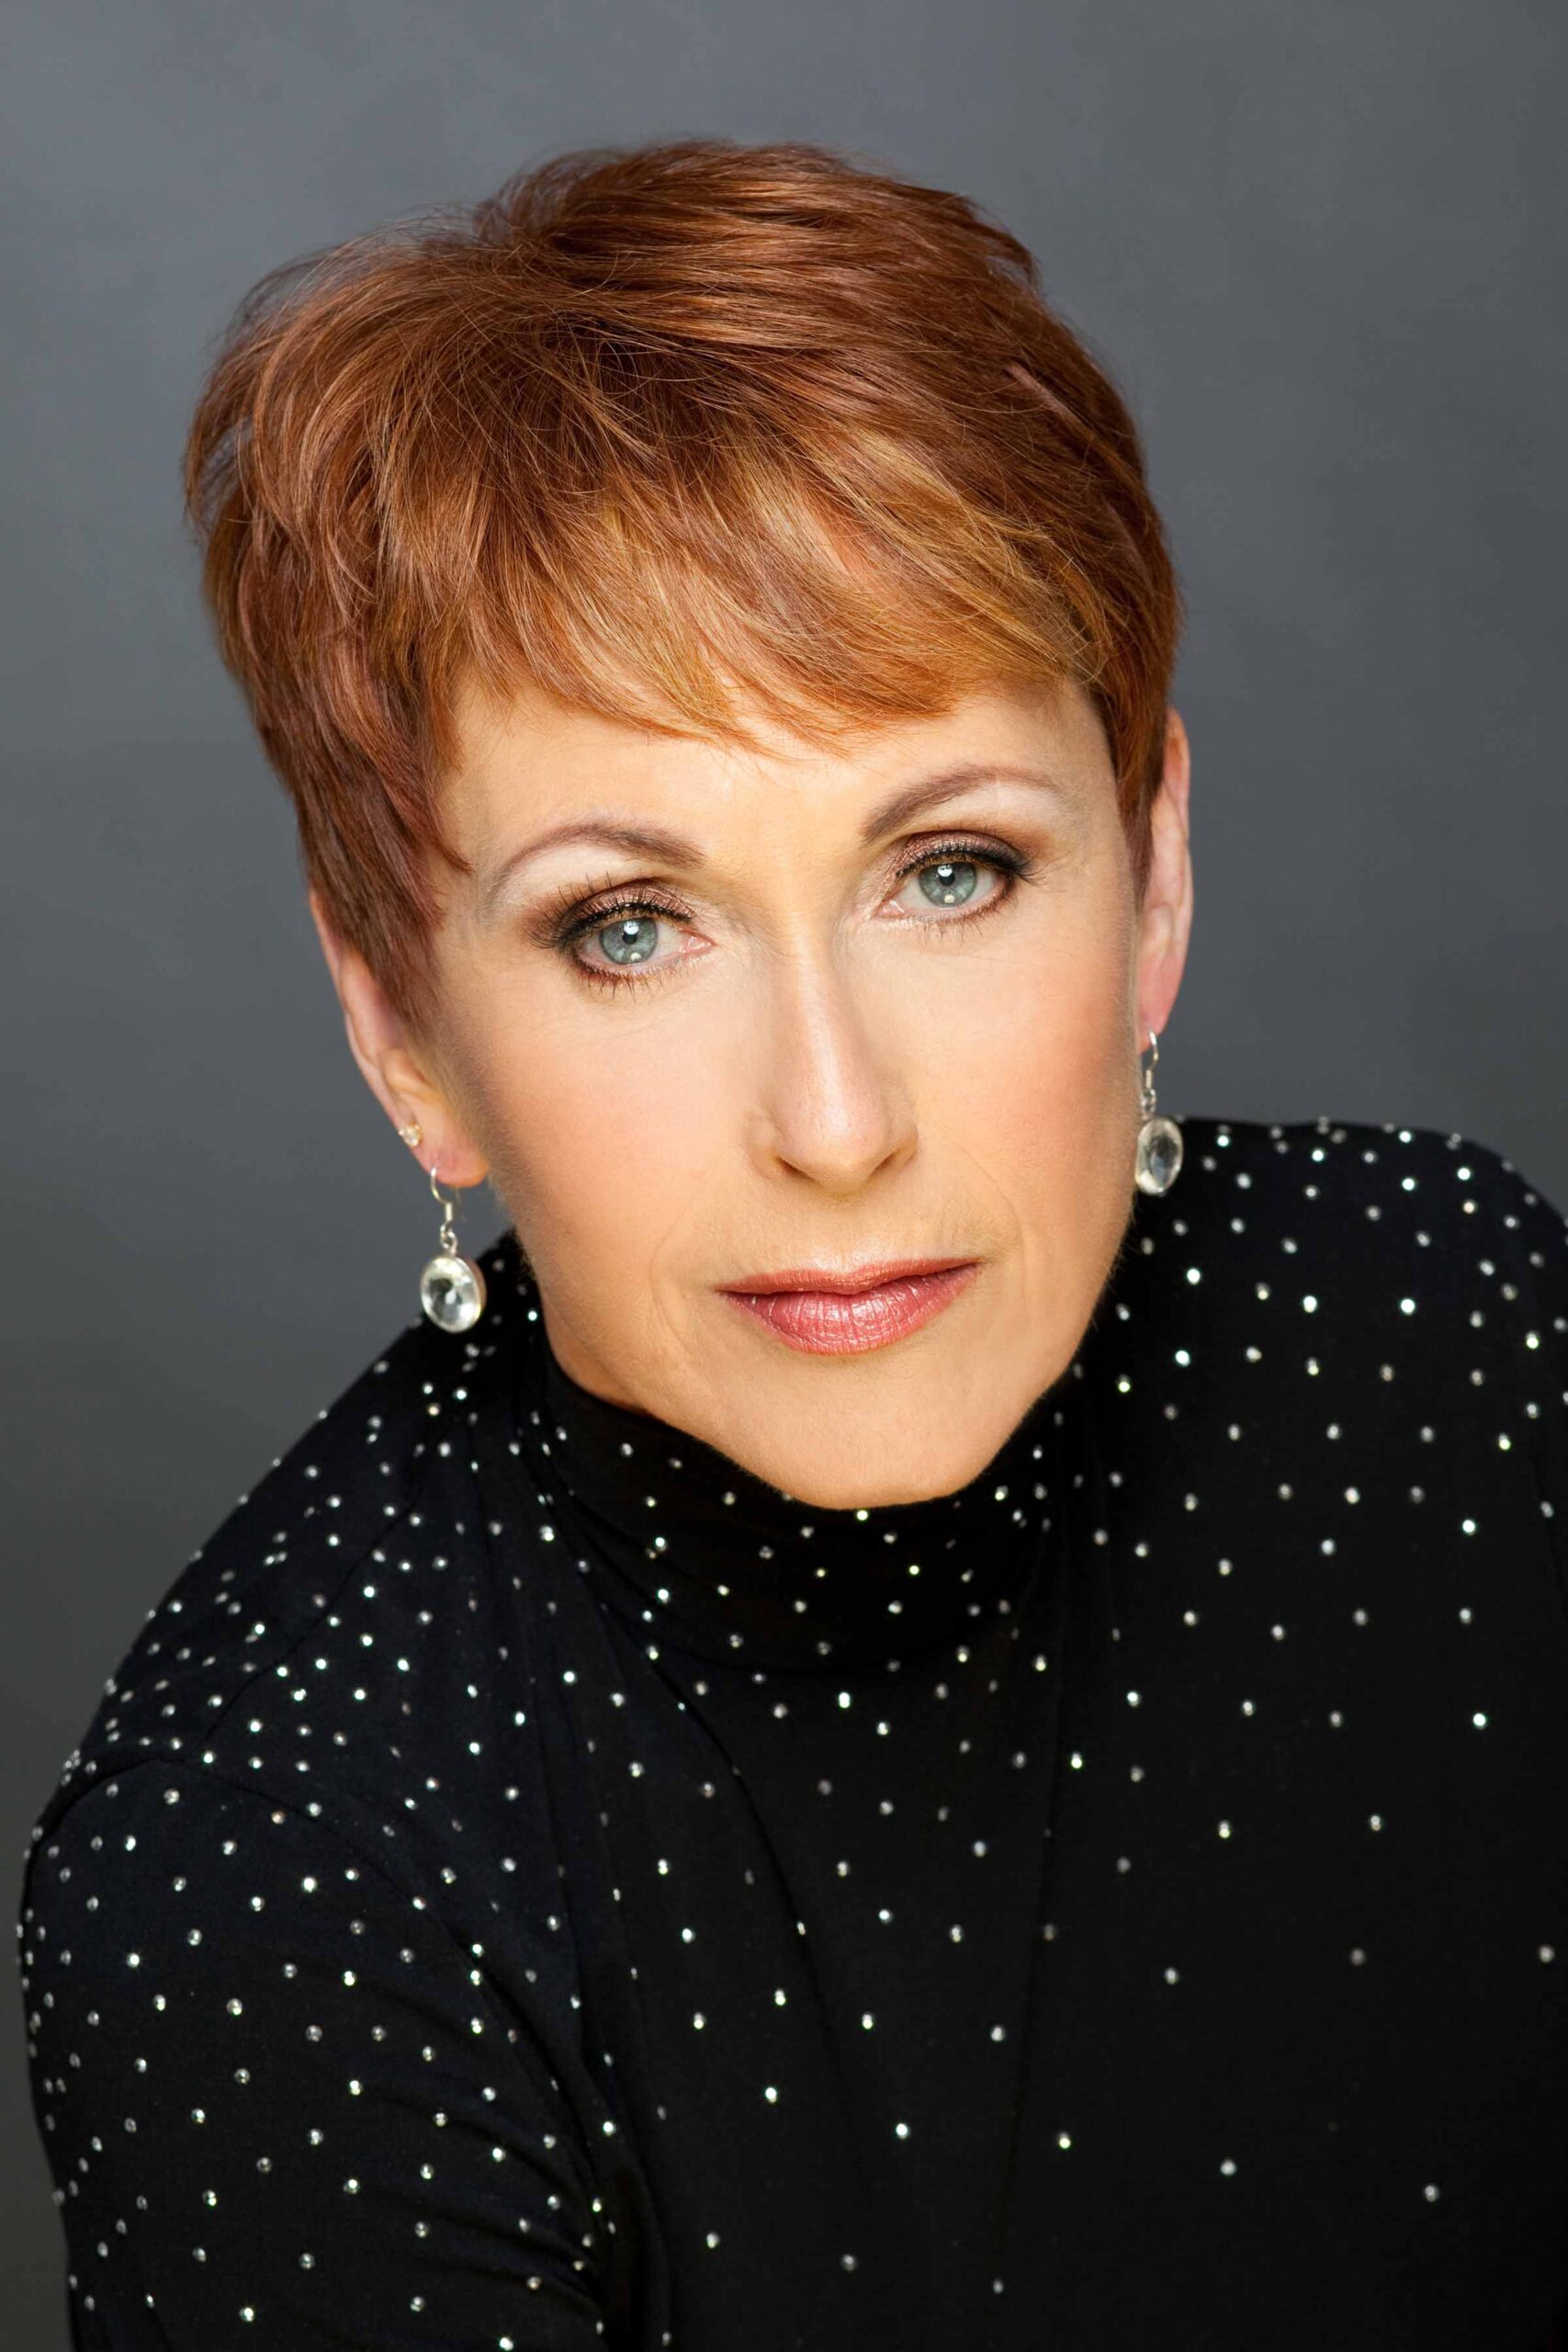 Amanda McBroom, Golden Globe Winner, renowned cabaret performer and songwriter (“The Rose”) has crafted sixteen songs in the voices of Shakespeare’s heroines.